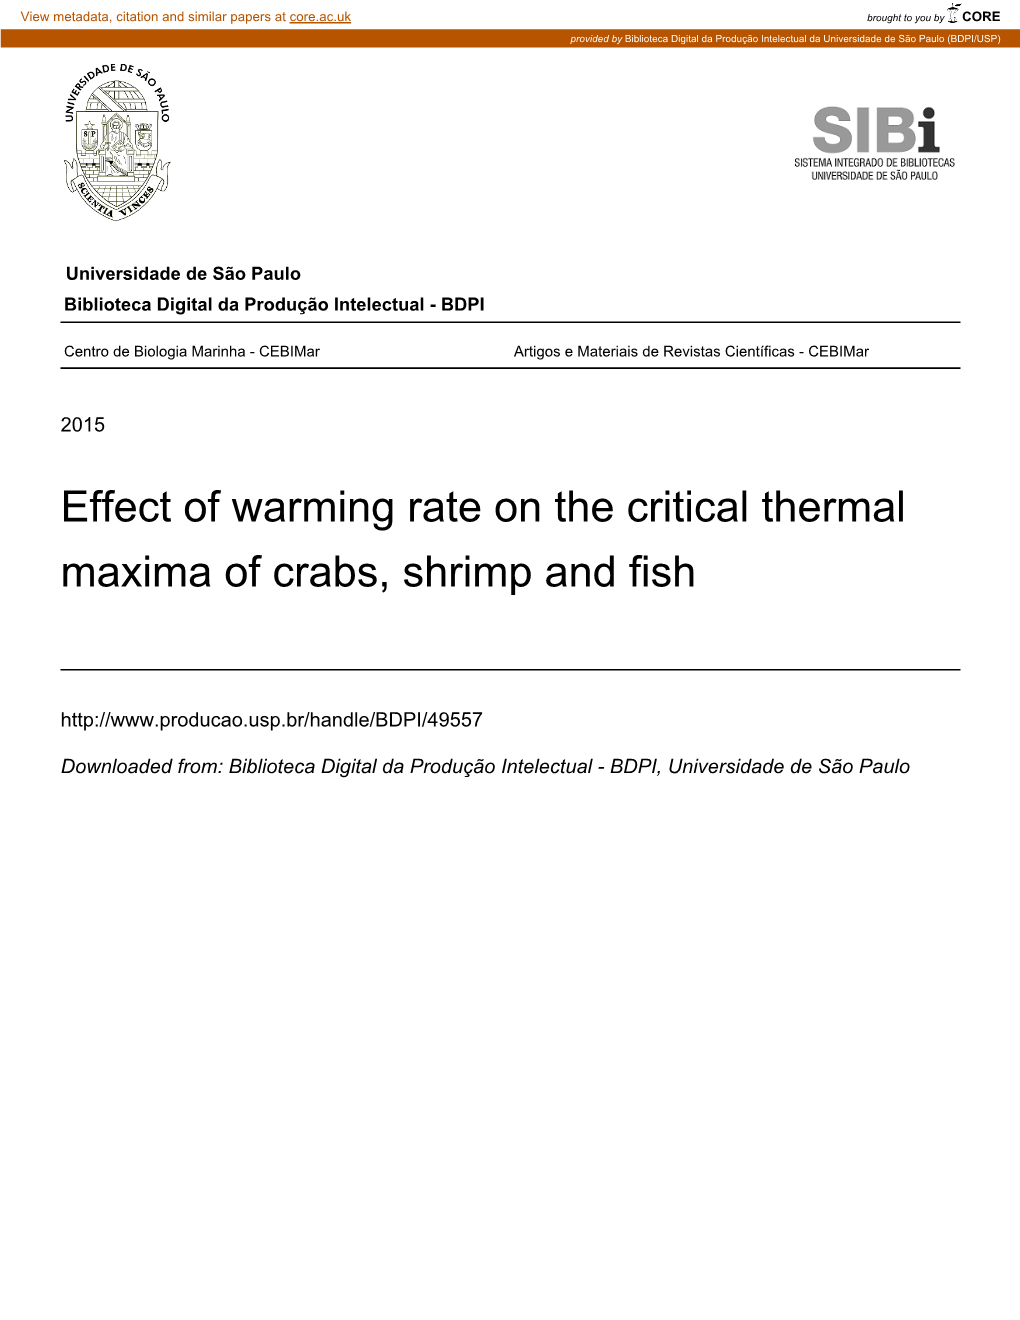 Effect of Warming Rate on the Critical Thermal Maxima of Crabs, Shrimp and Fish